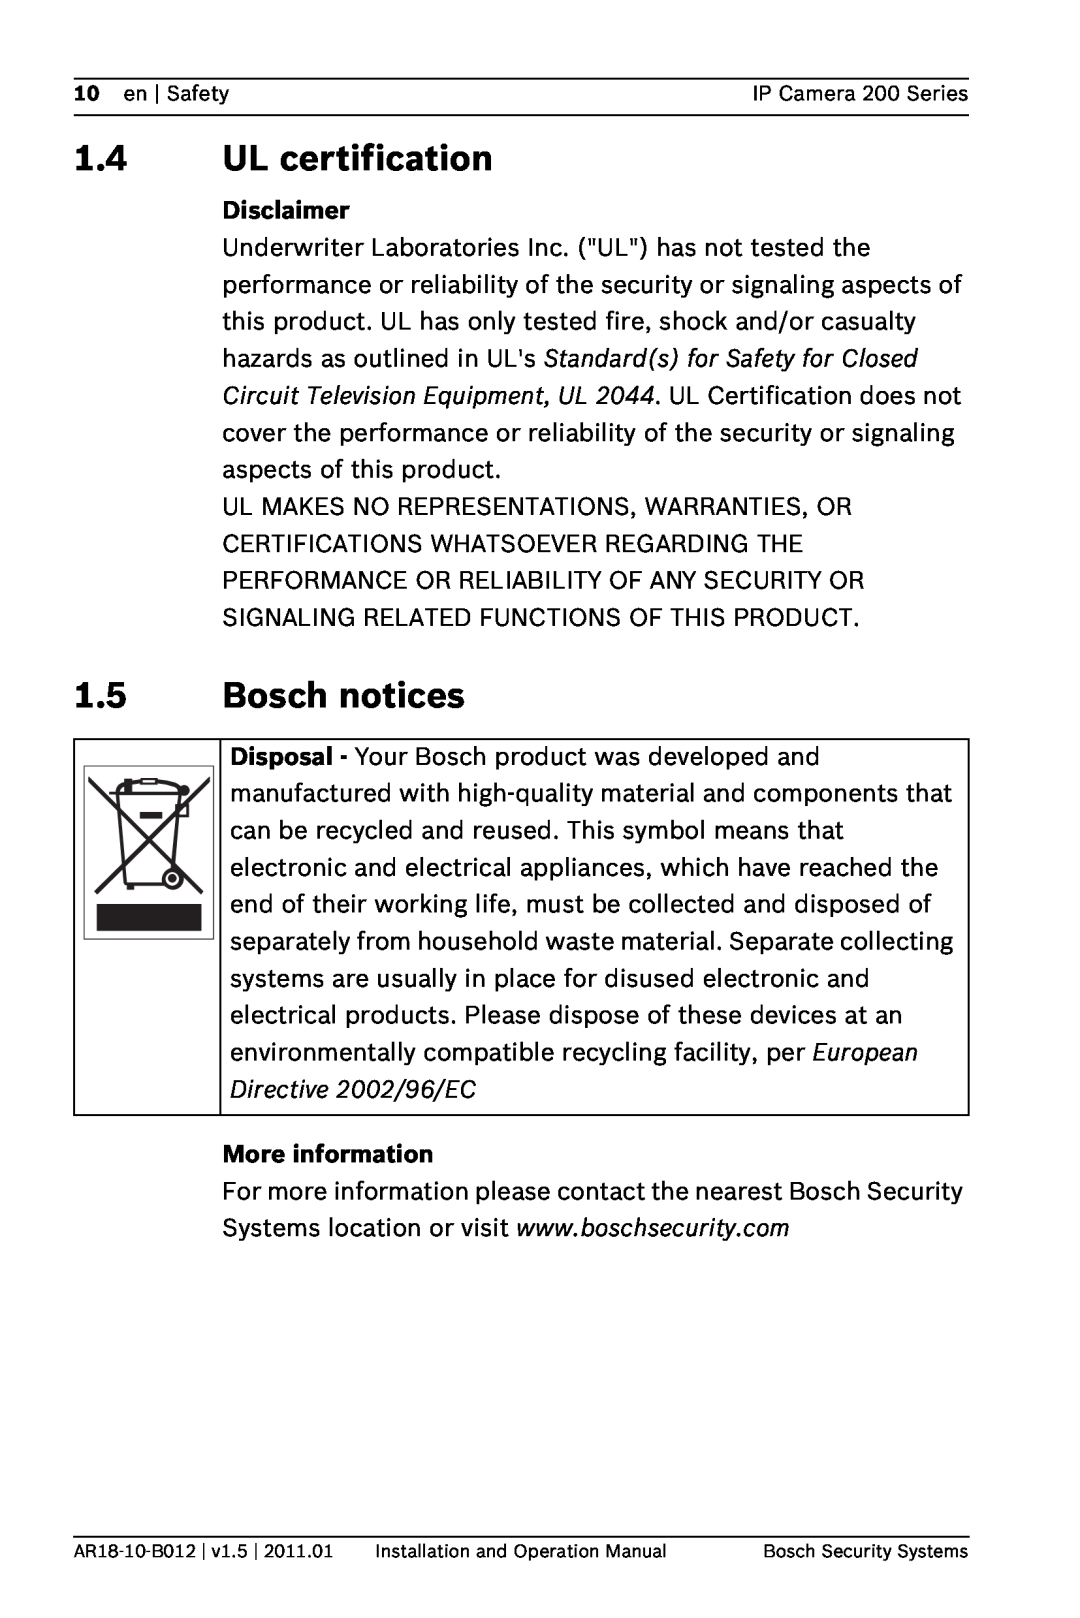 Bosch Appliances NDC-265-P operation manual UL certification, Bosch notices, Disclaimer, More information 